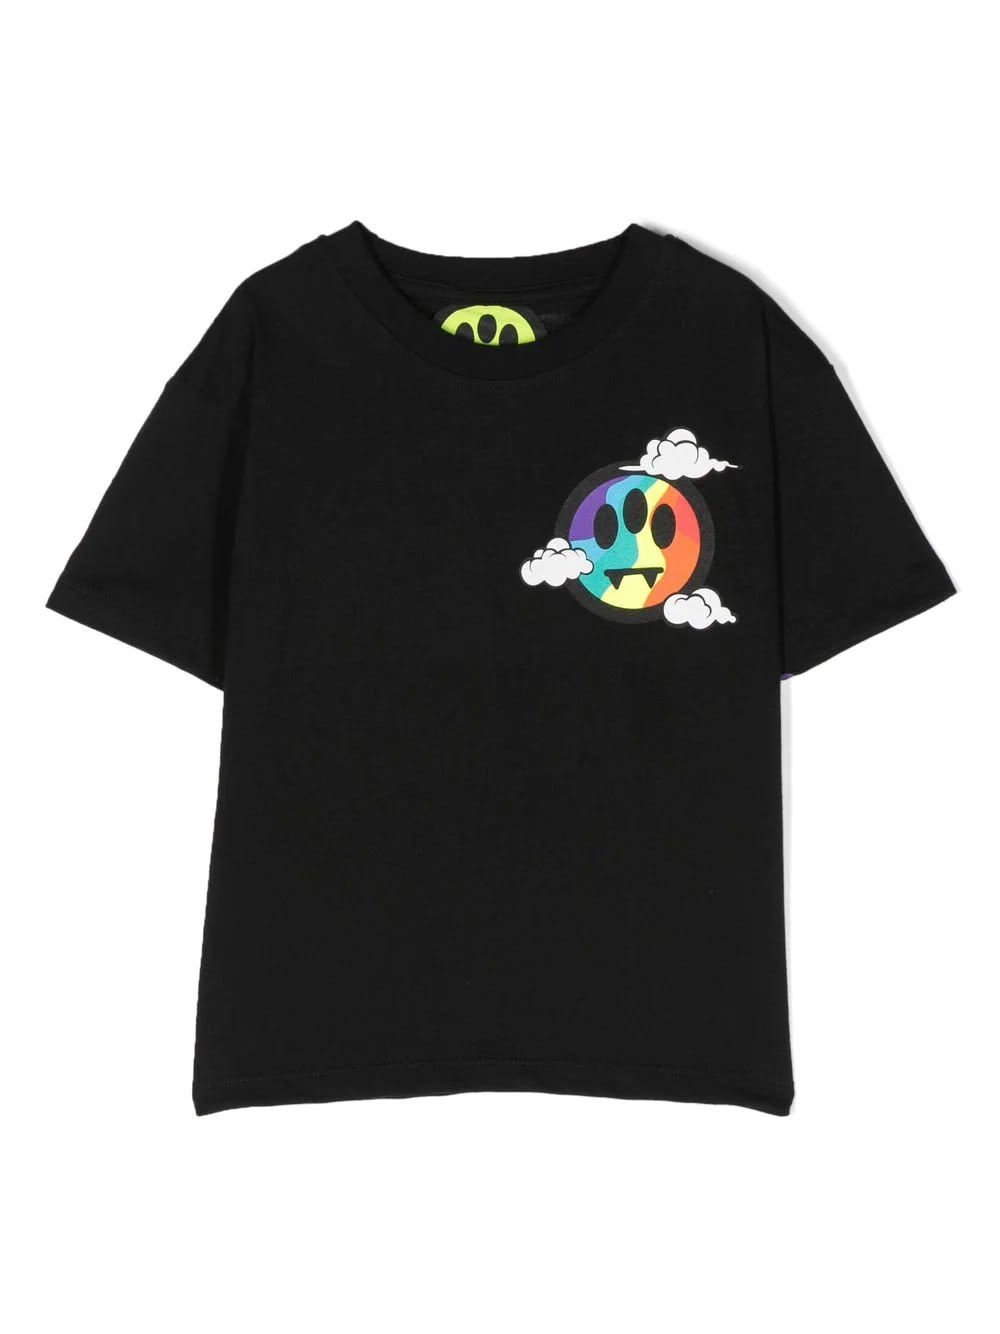 BARROW BLACK T-SHIRT WITH MULTICOLOURED LOGO ON FRONT AND BACK